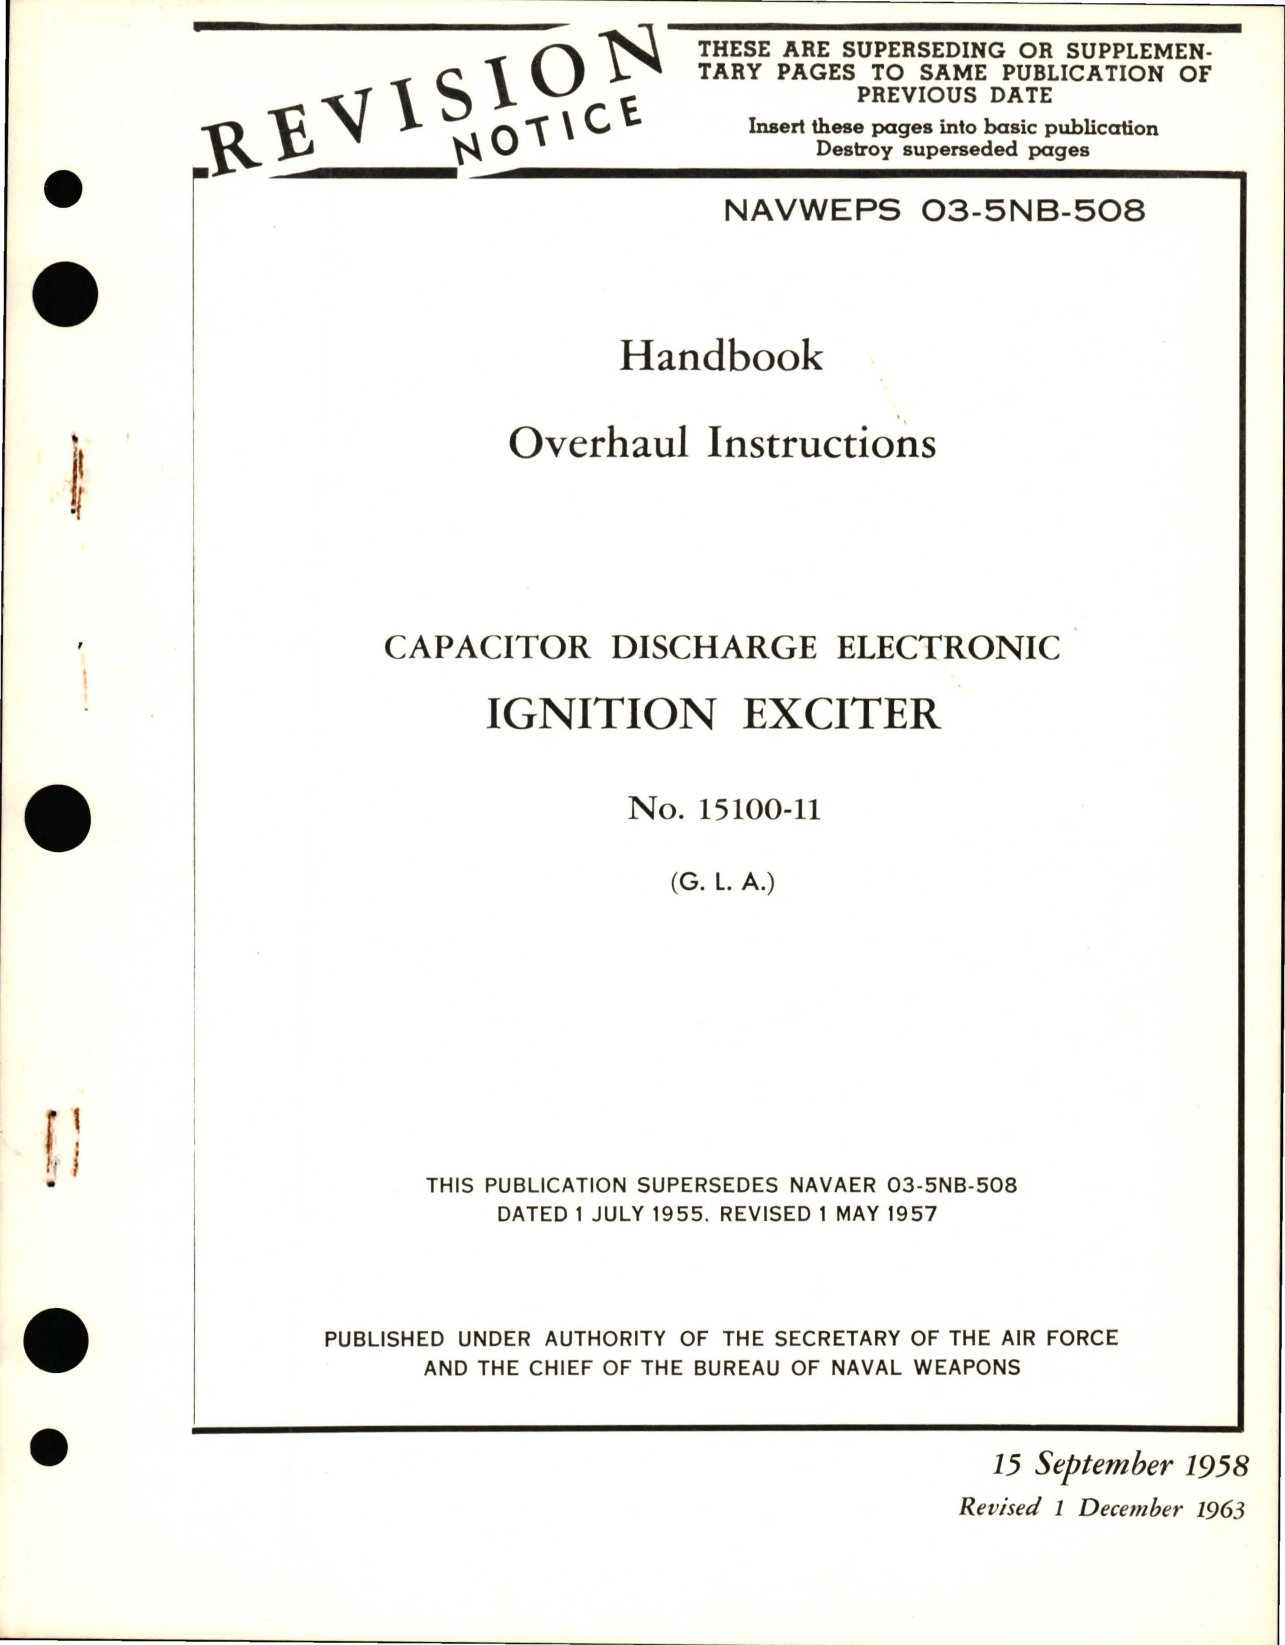 Sample page 1 from AirCorps Library document: Overhaul Instructions for Capacitor Discharge Electronic Ignition Exciter - No 15100-11